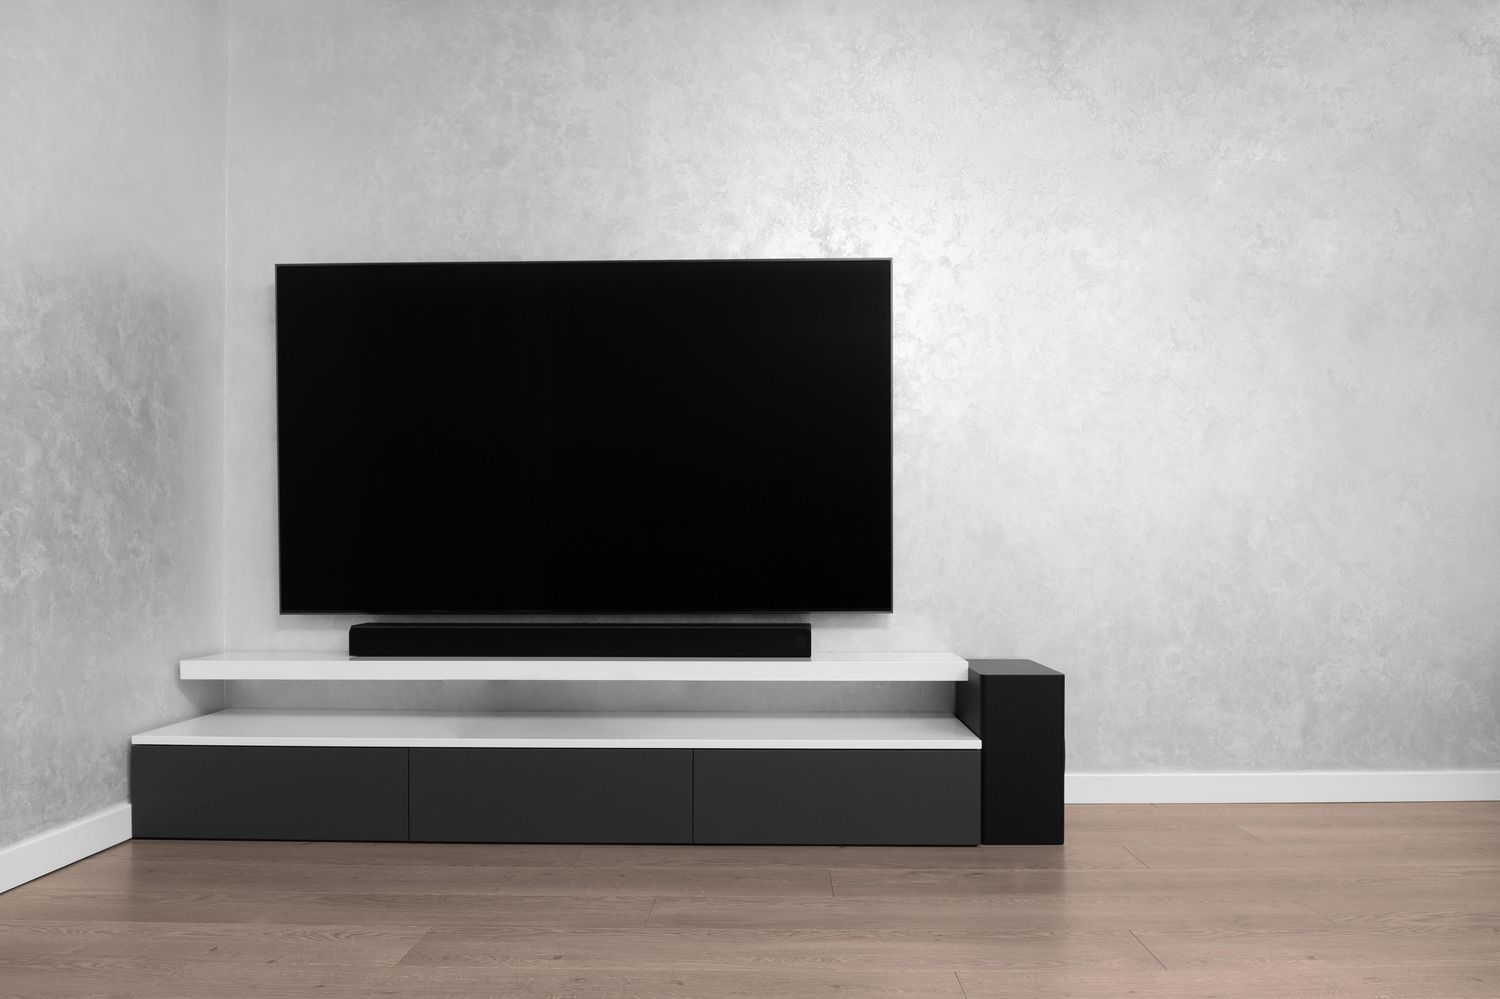 Where To Place The Subwoofer With A Sound Bar